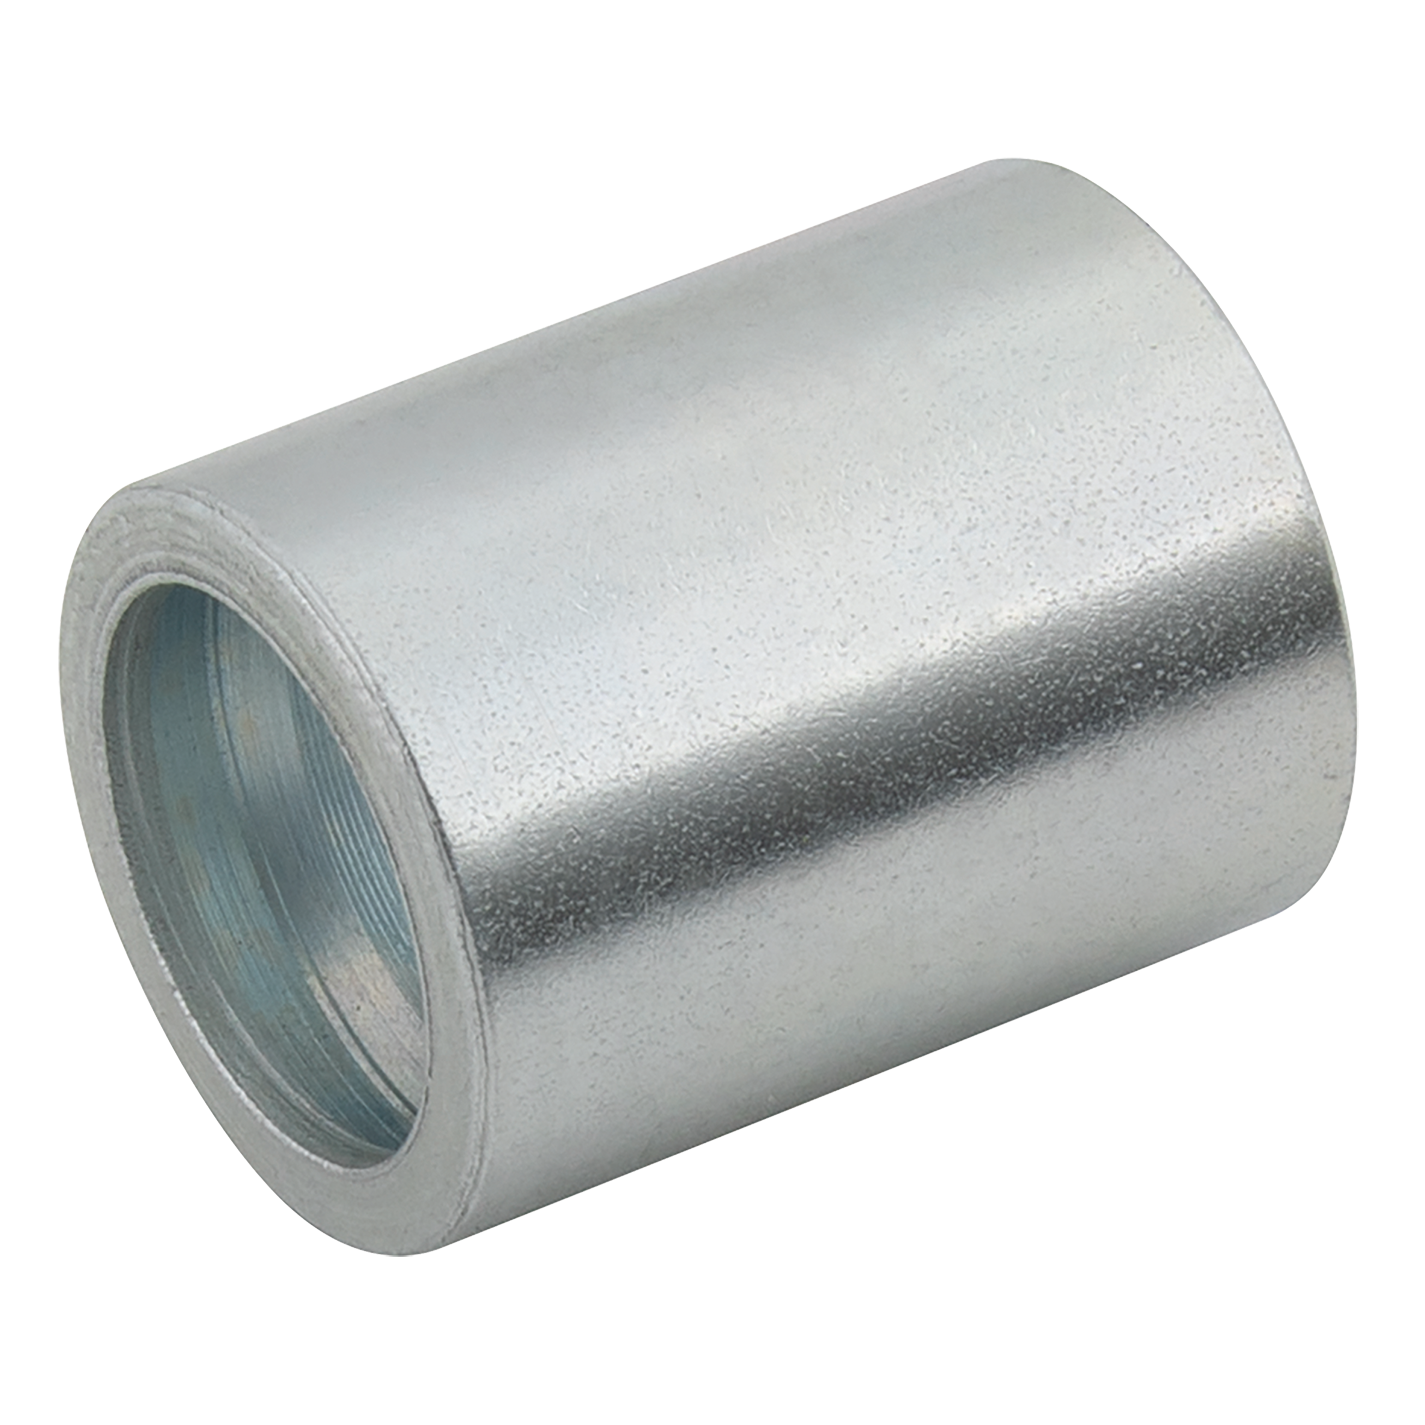  5/8" Hose Insert Ferrule Smooth and Convoluted Bore